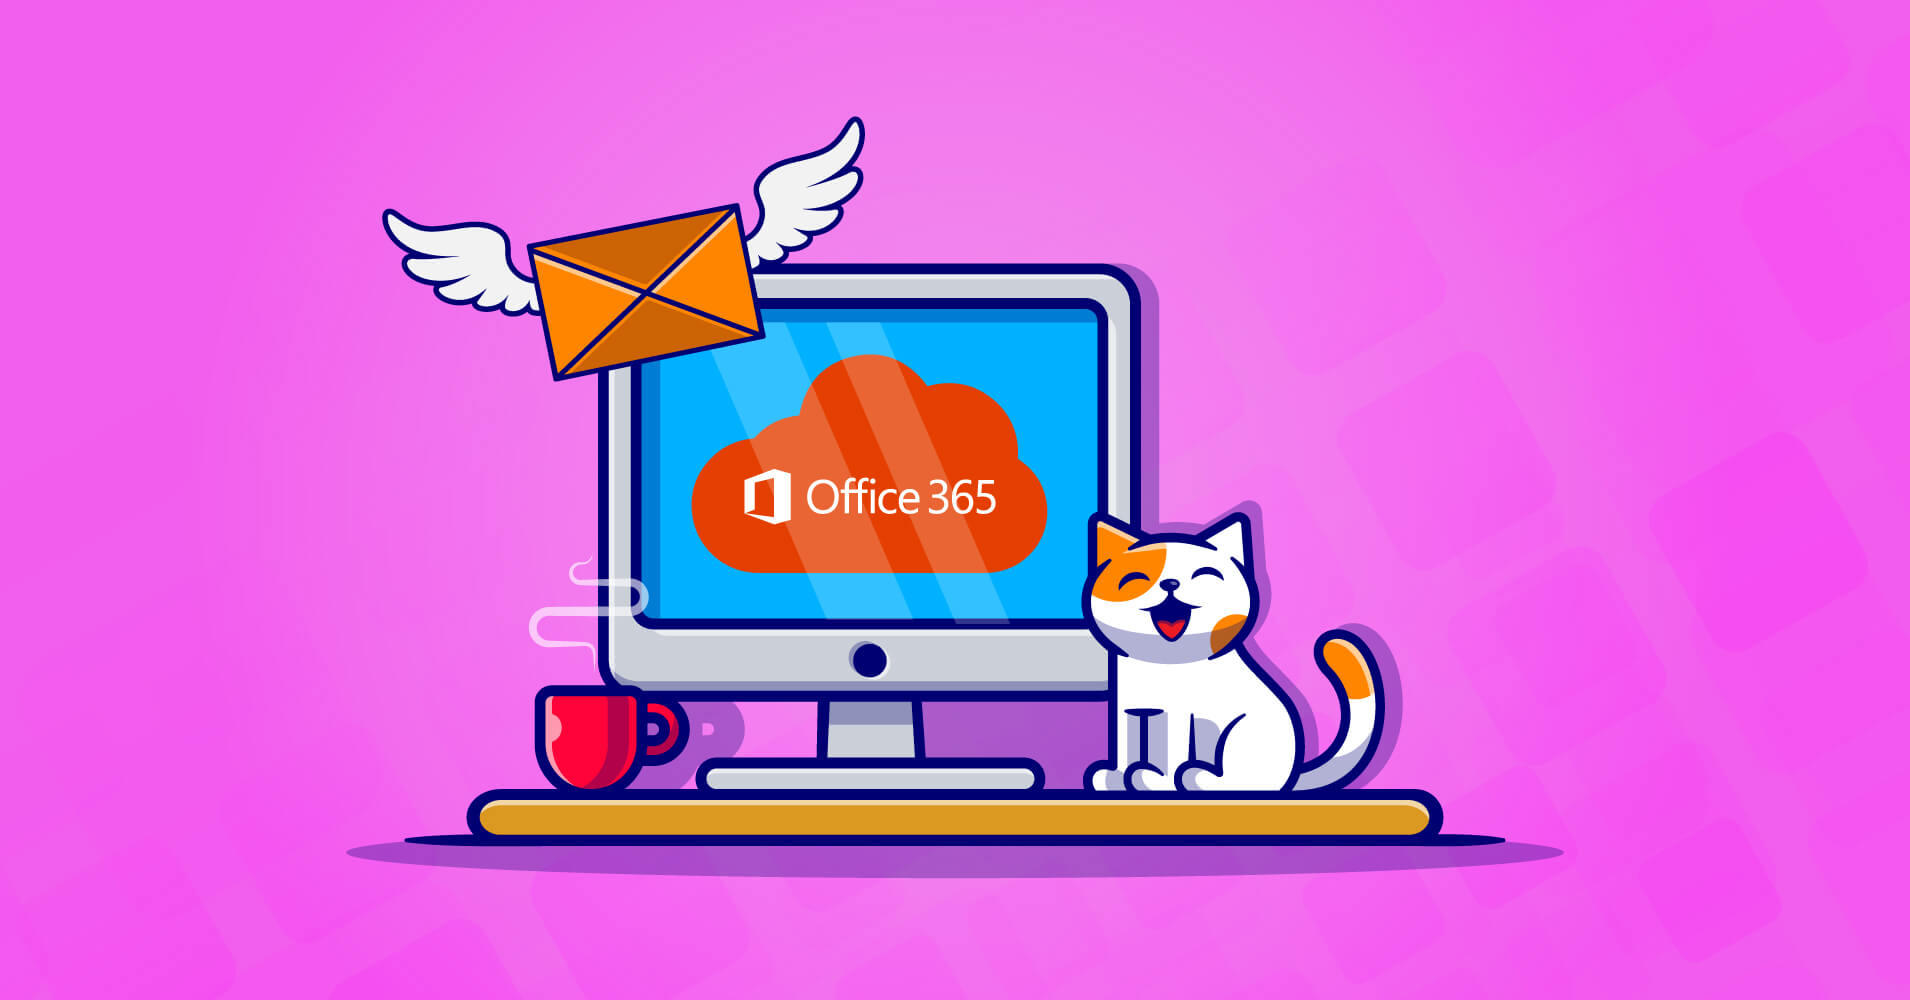 How to send WordPress emails with Microsoft 365 account